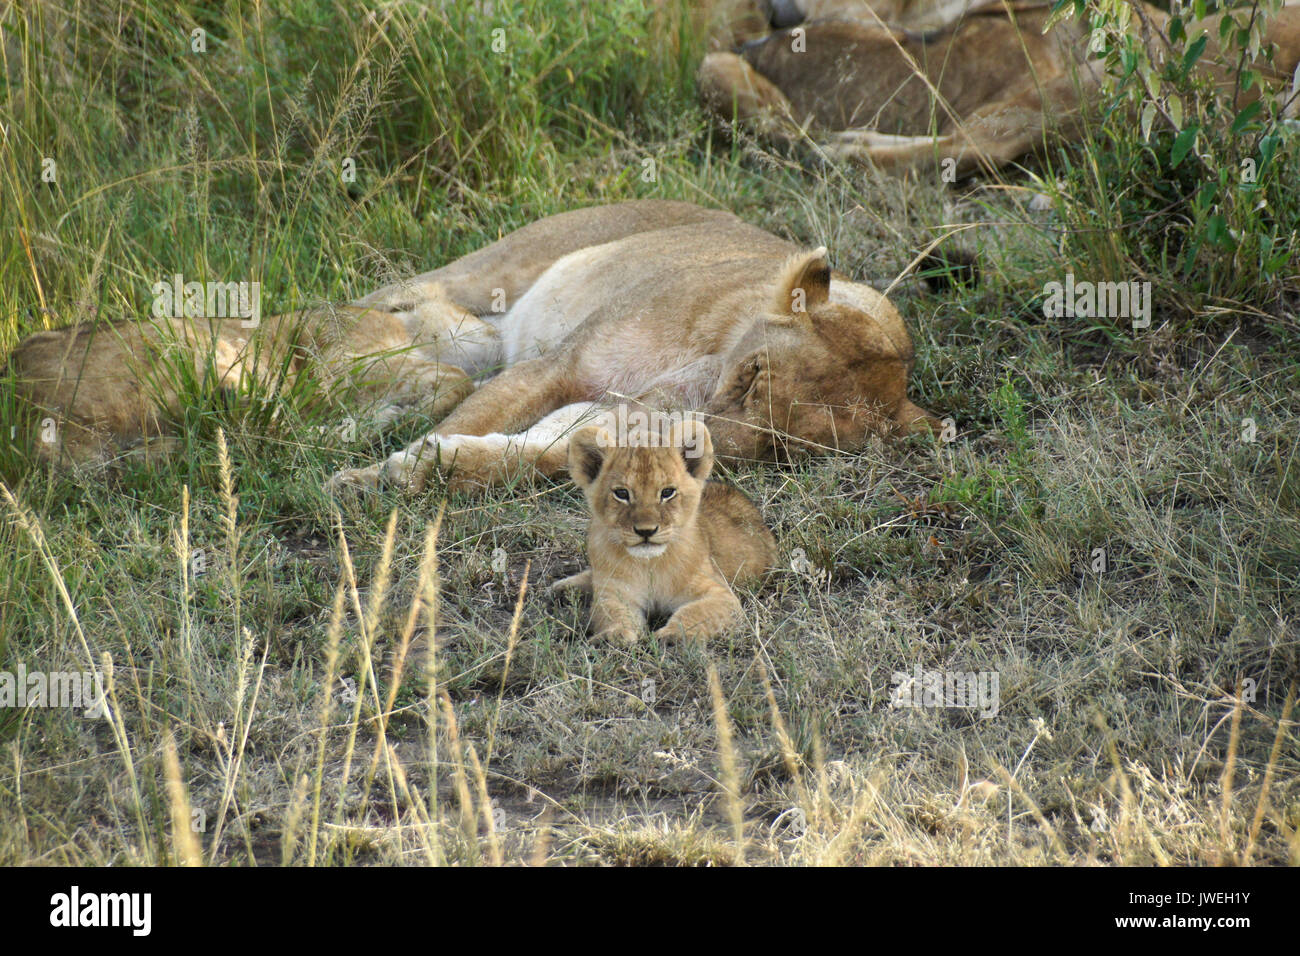 Tiny lion cub awake while the rest of the pride sleeps in the shade, Masai Mara Game Reserve, Kenya Stock Photo